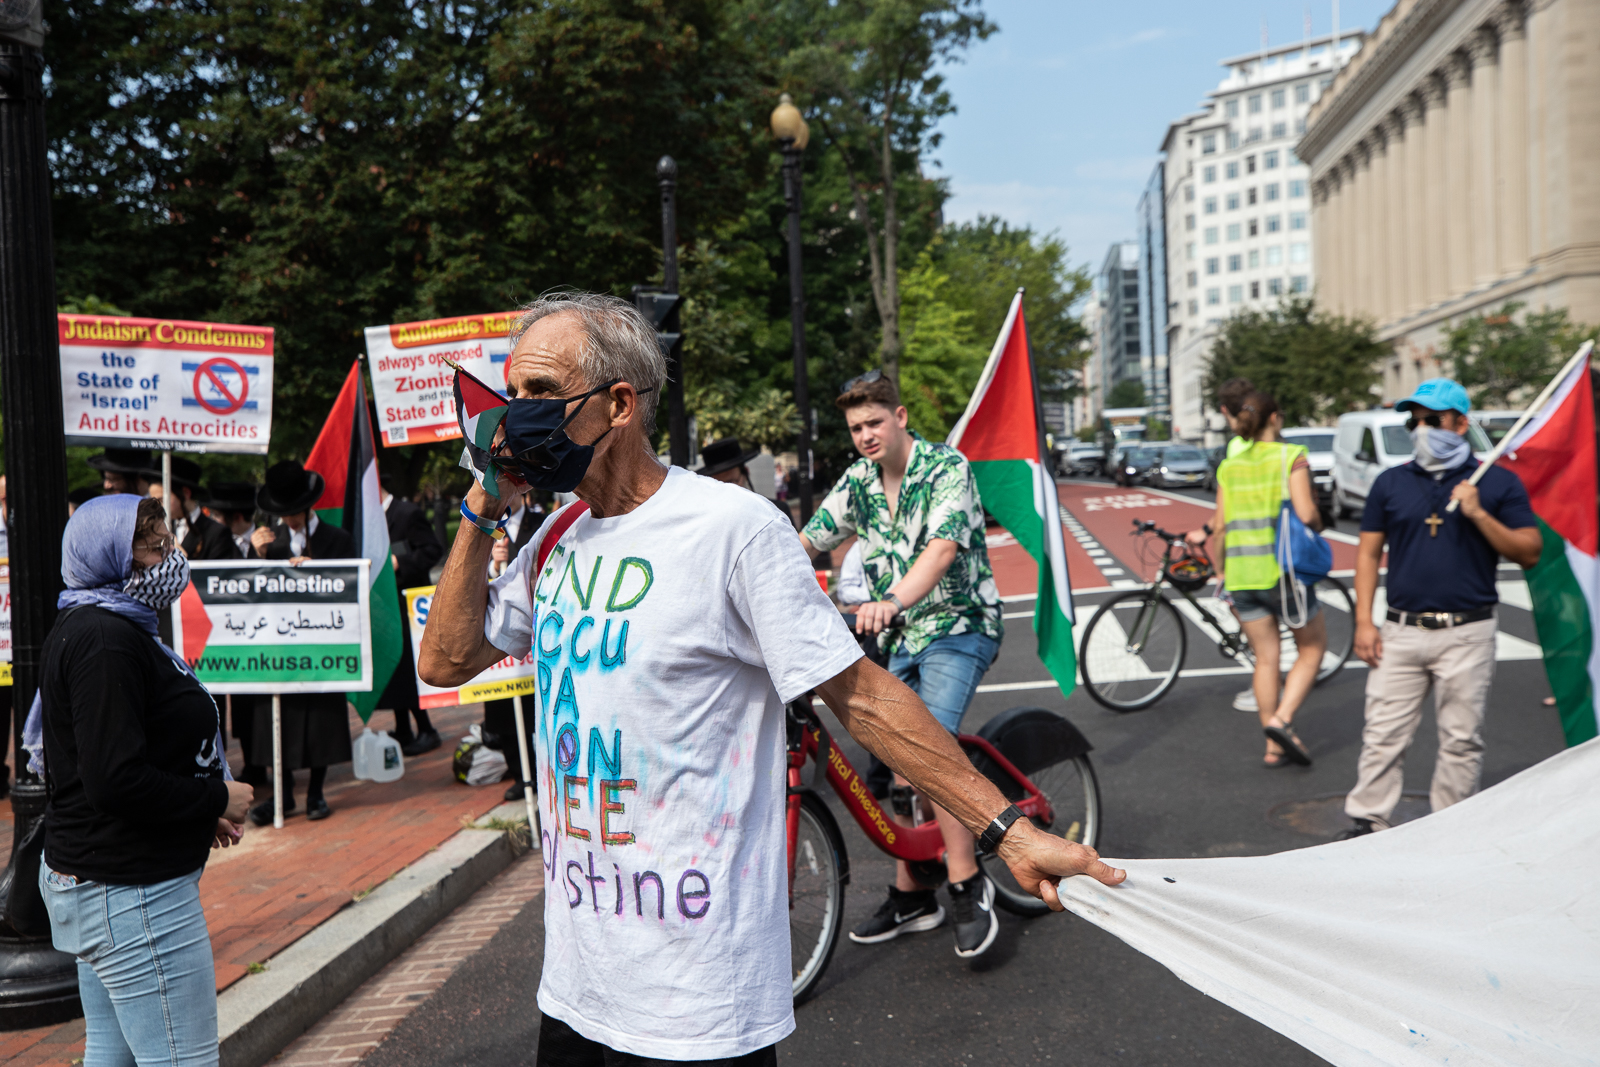 Demonstrators gathered in front of the White House to protest President Joe Biden's meeting with Israeli Prime Minister Naftali Bennett in Washington, D.C. on August 26, 2021. (Kaylee Greenlee - Daily Caller News Foundation)